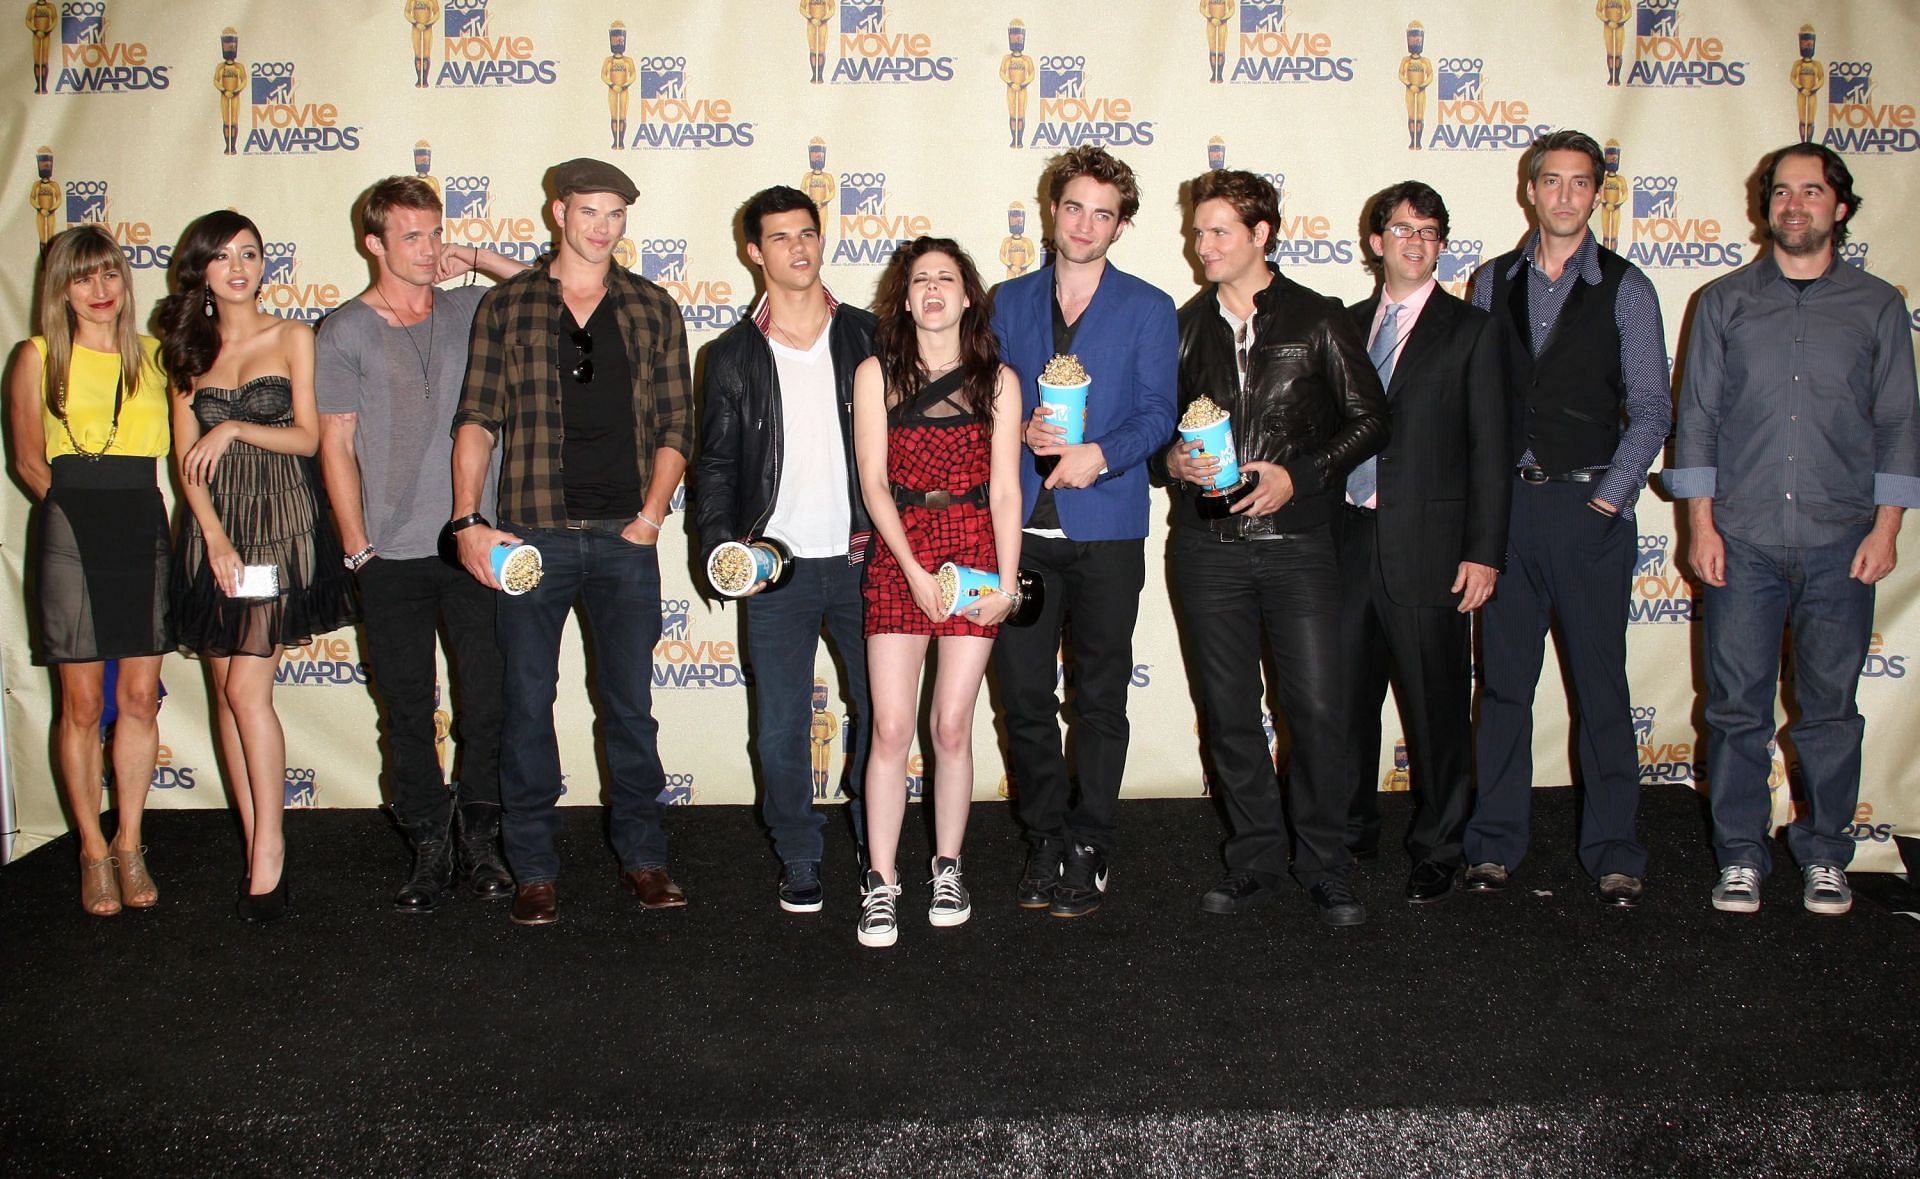 The cast and crew of the Twilight movies (Image via Getty)